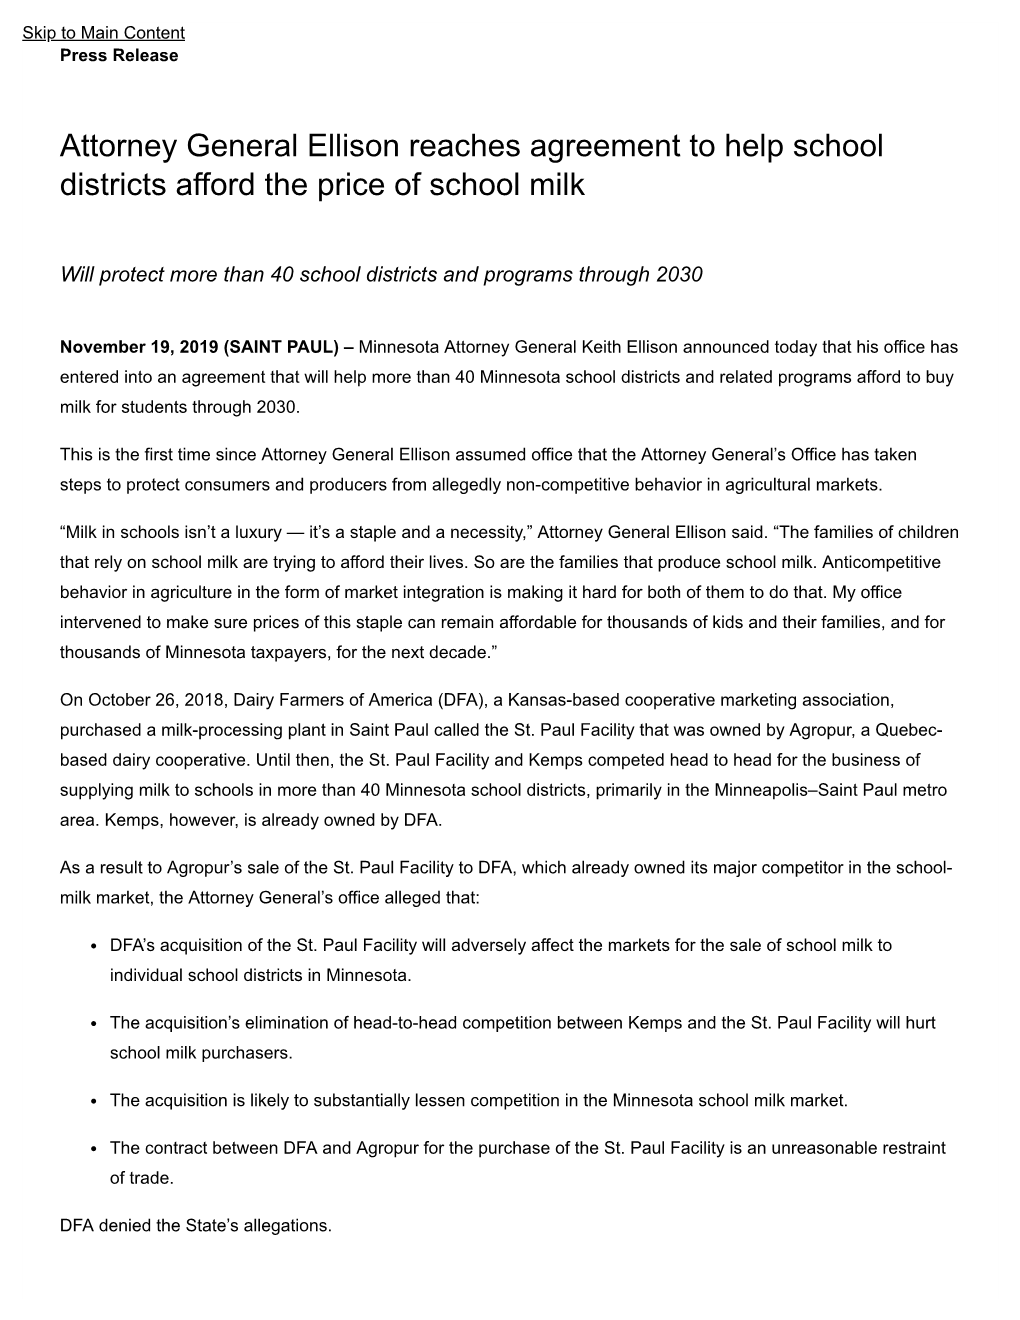 Attorney General Ellison Reaches Agreement to Help School Districts Afford the Price of School Milk